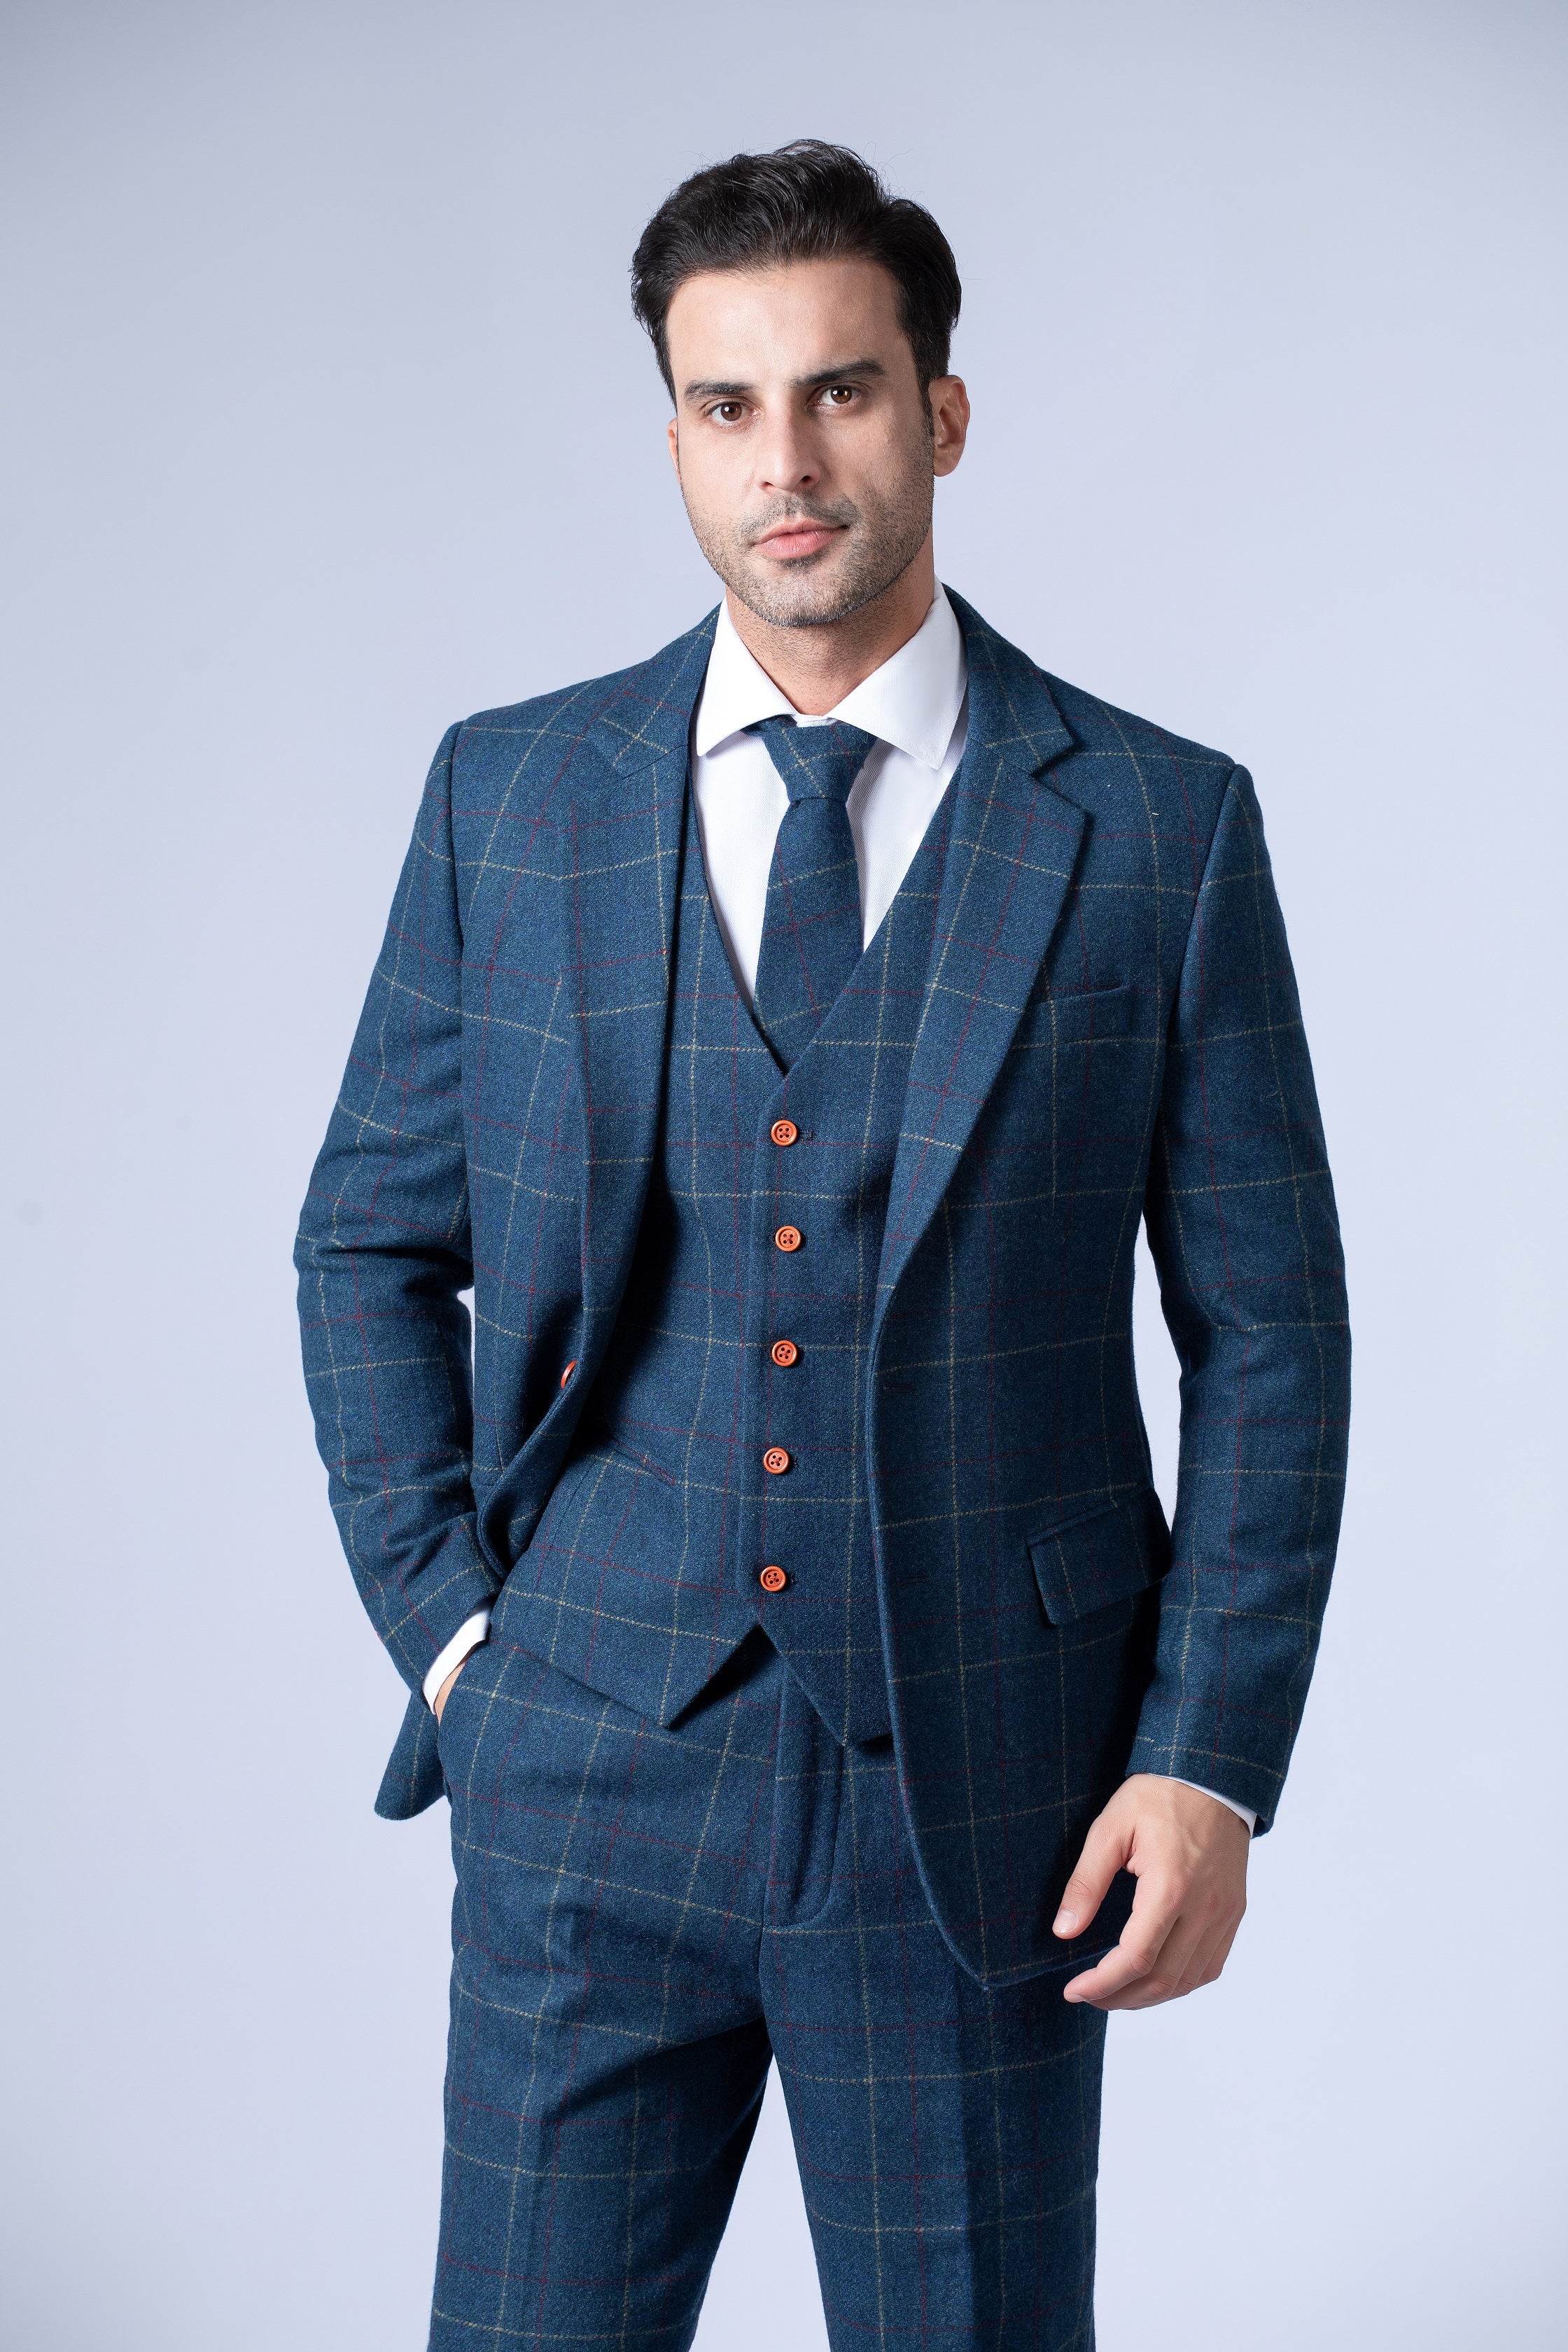 Tailored Blue Tweed Suit - 3 Piece Overcheck Twill Men's Suit by Empire ...